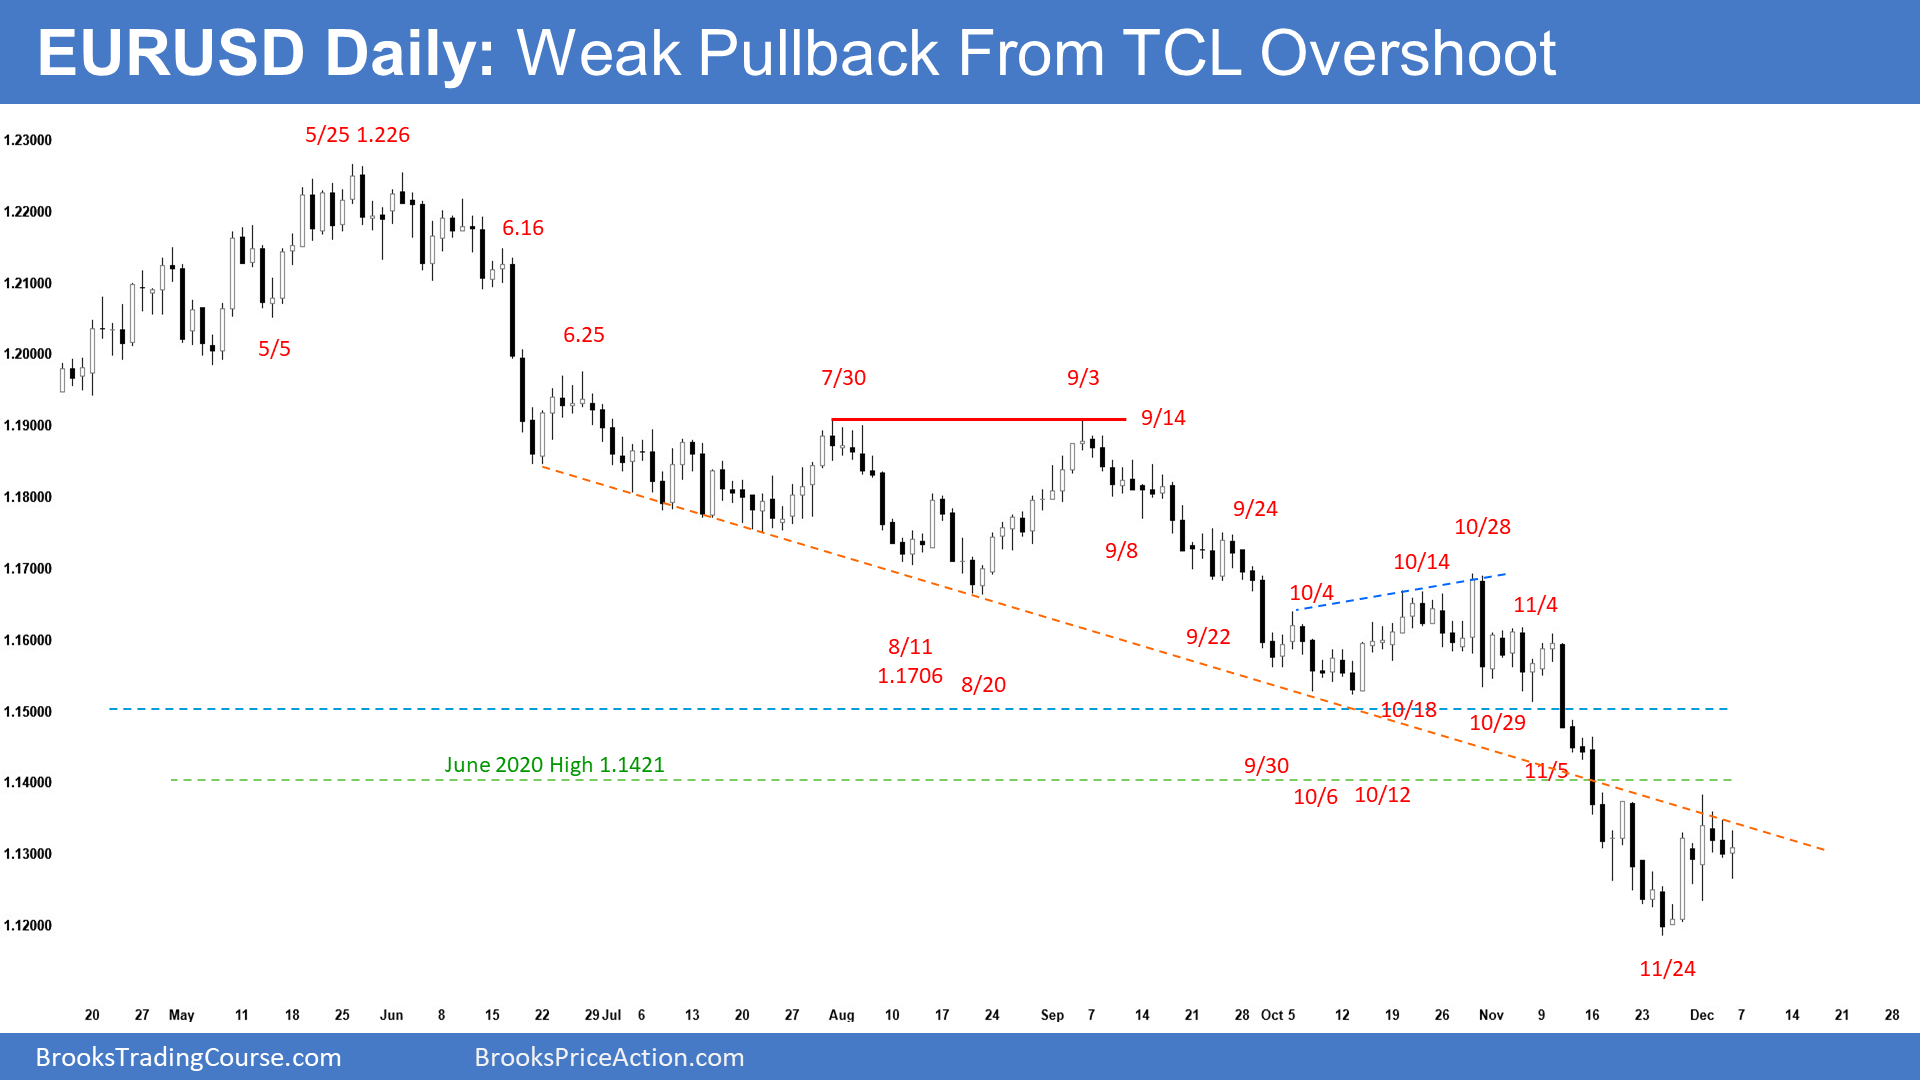 EURUSD Forex Daily Chart Weak Pullback from TCL Overshoot